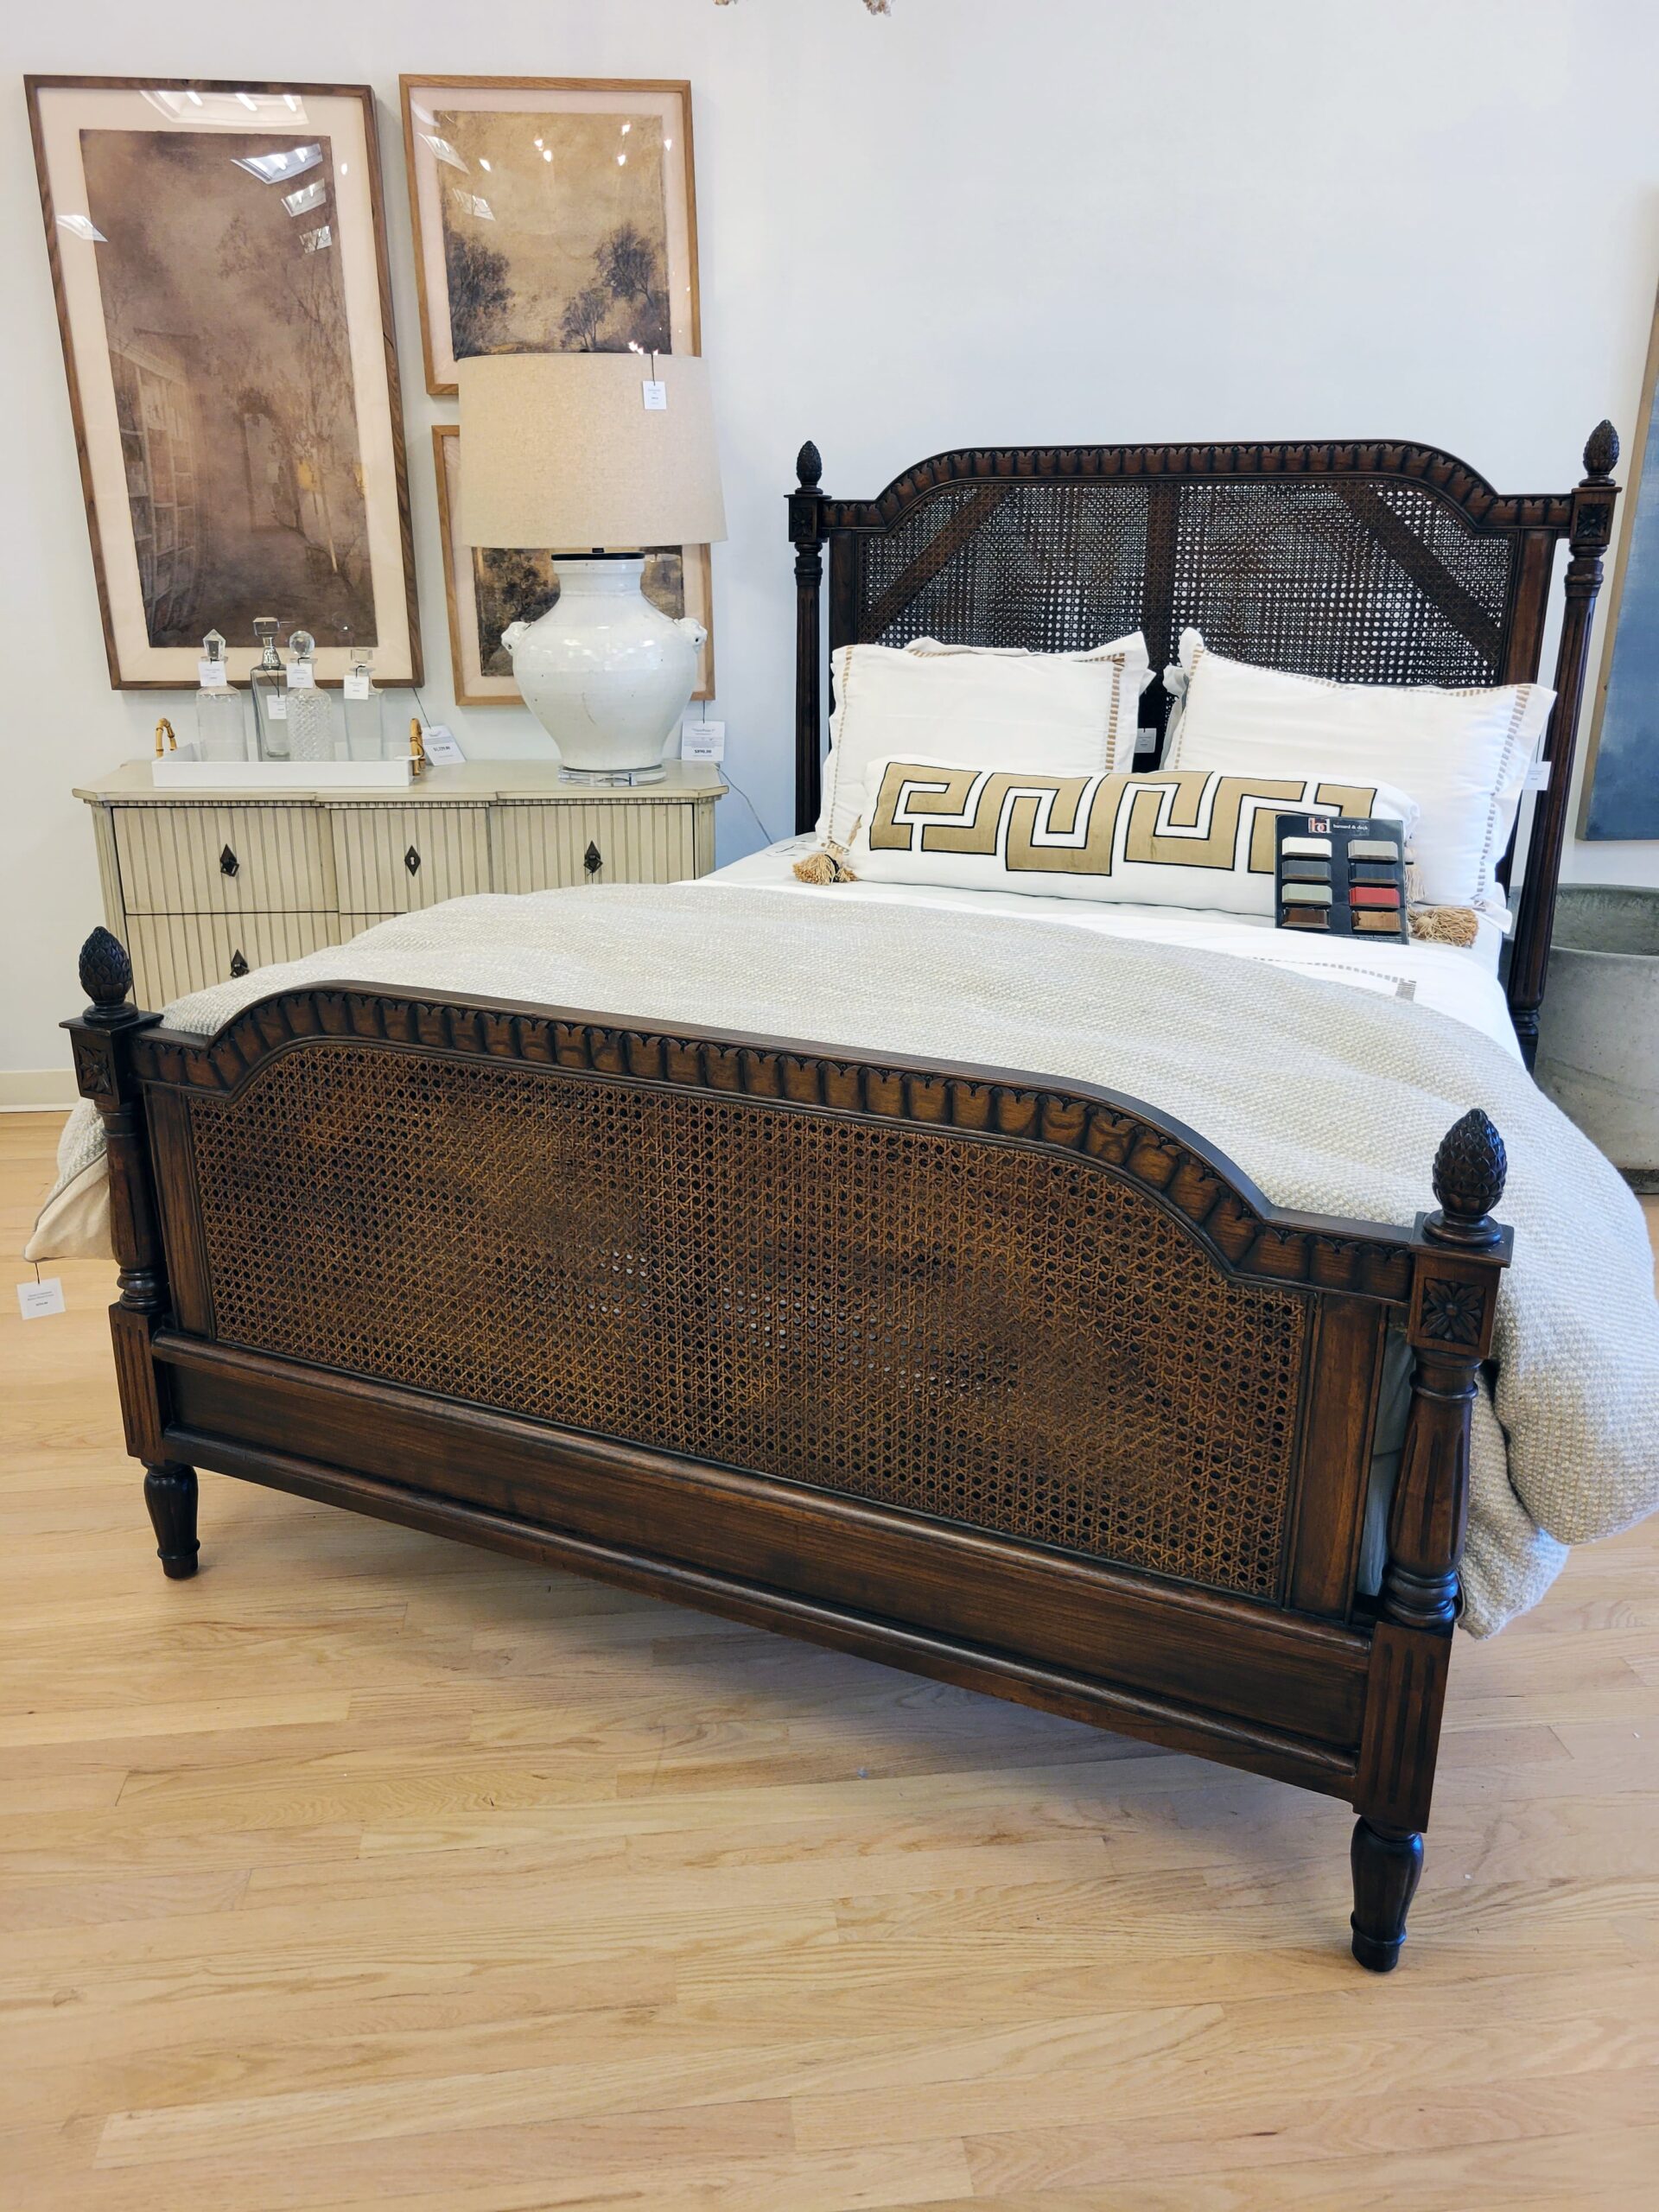 ornate bedframe with linens and nightstand